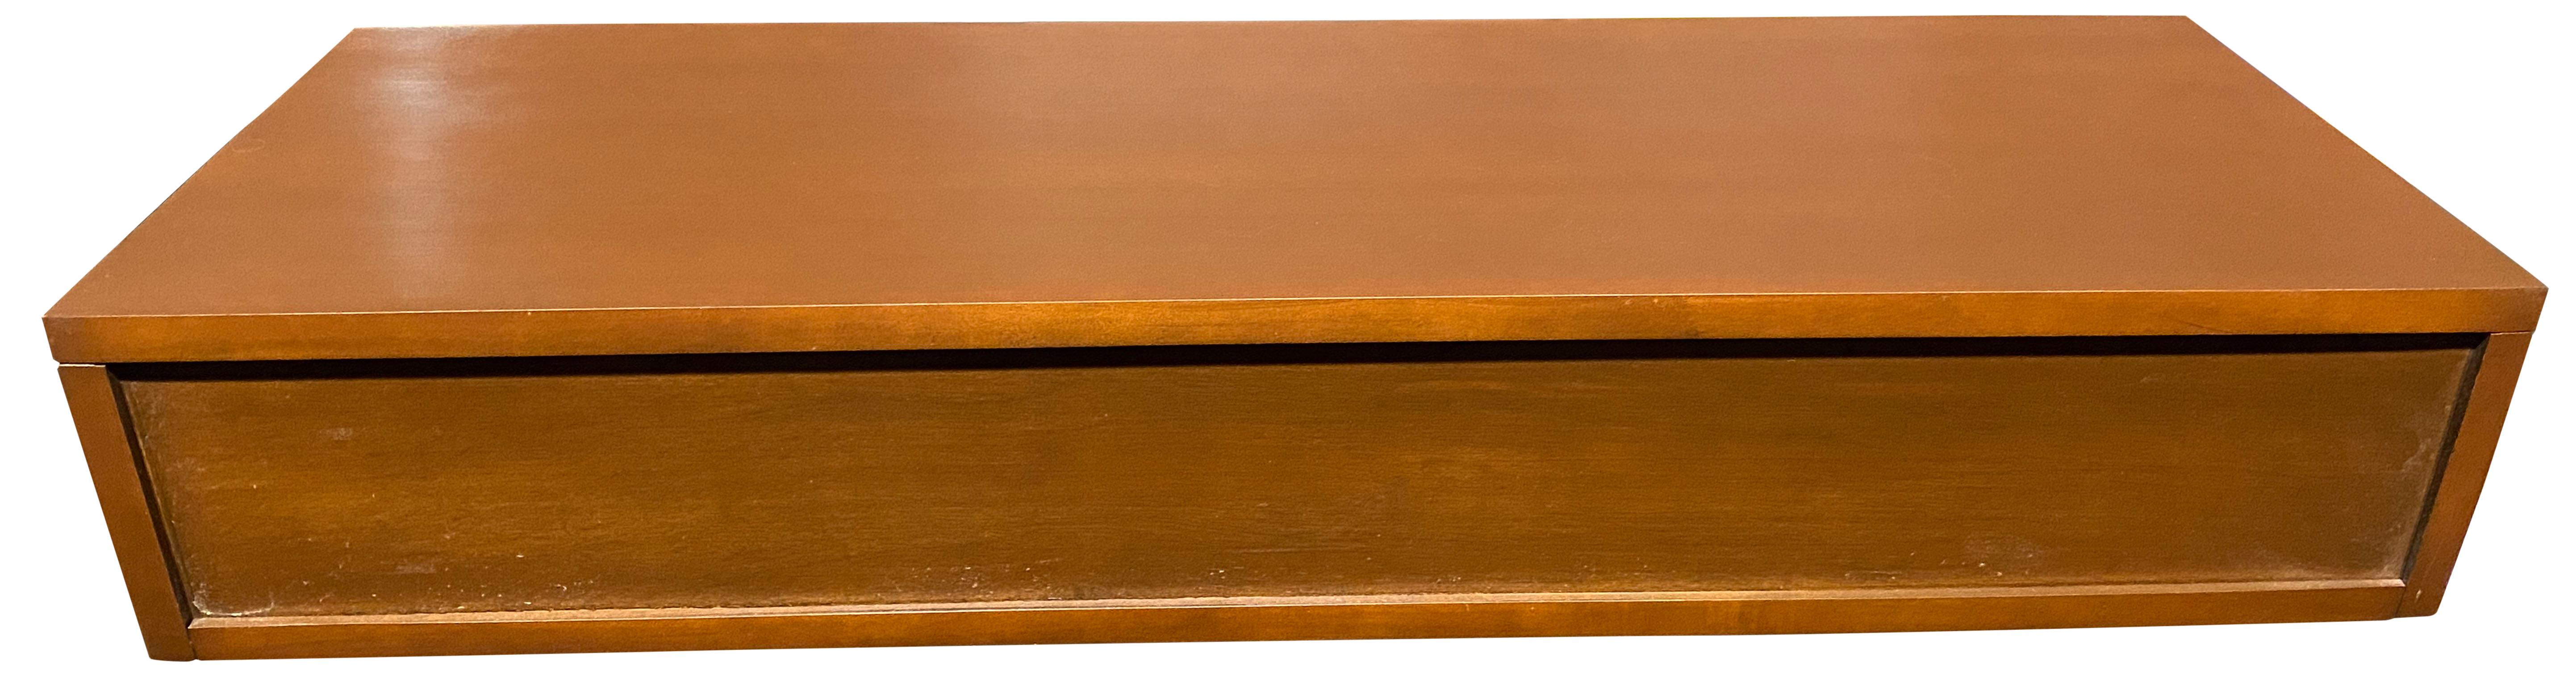 Midcentury Paul McCobb Small Jewelry Chest 4 Drawers Maple Brass Brown Finish For Sale 3